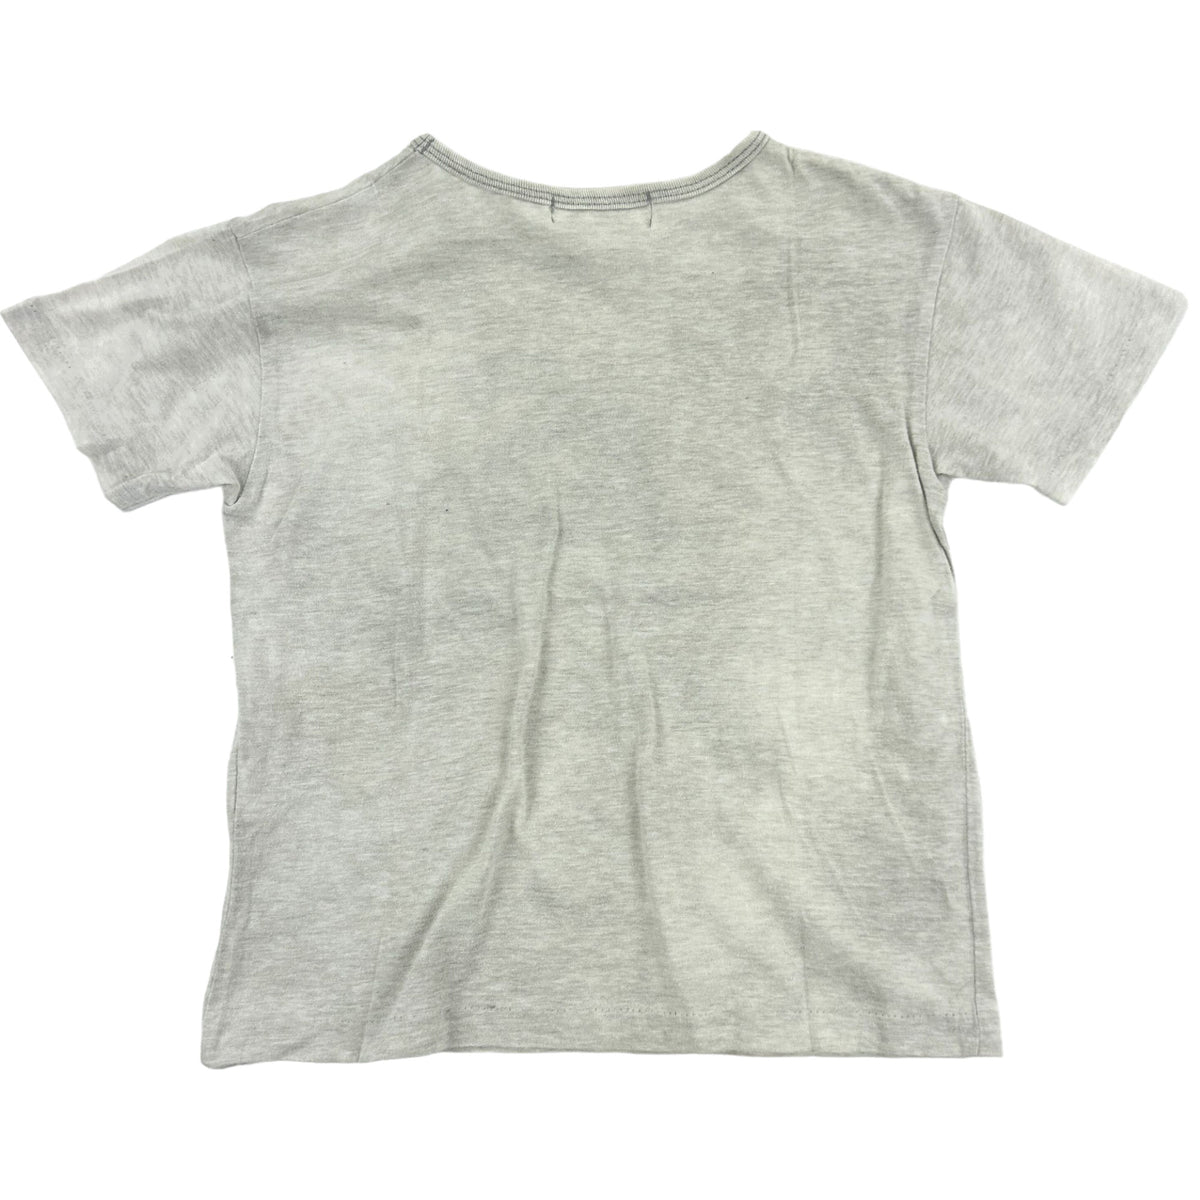 Vintage I.S Issey Miyake Baby Doll T-Shirt Woman&#39;s Size S